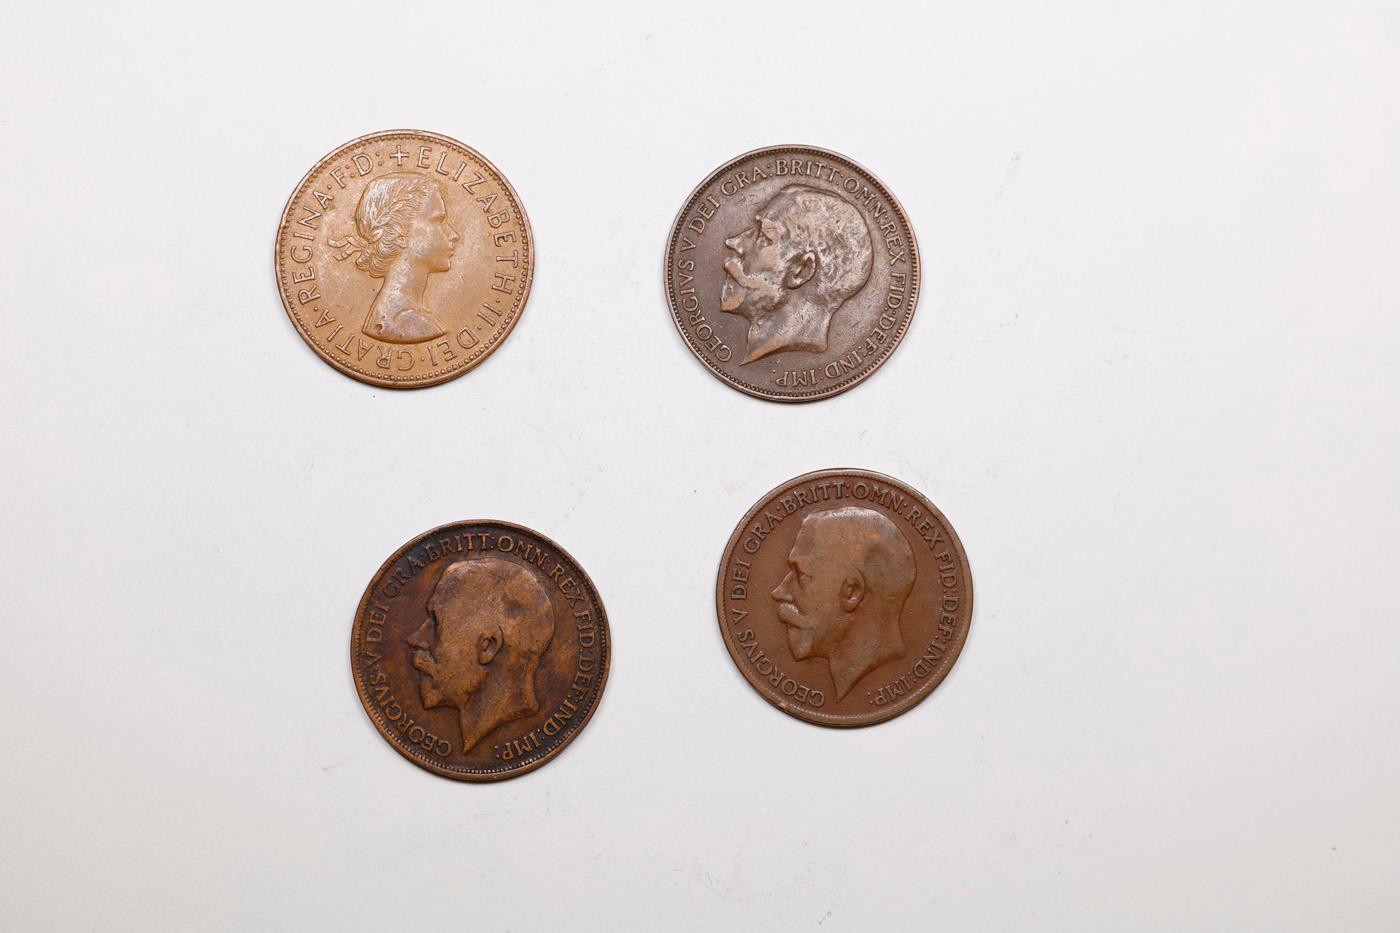 Group of 4 Coins, Great Britain Pennies, 1915, 1918, 1926, 1967